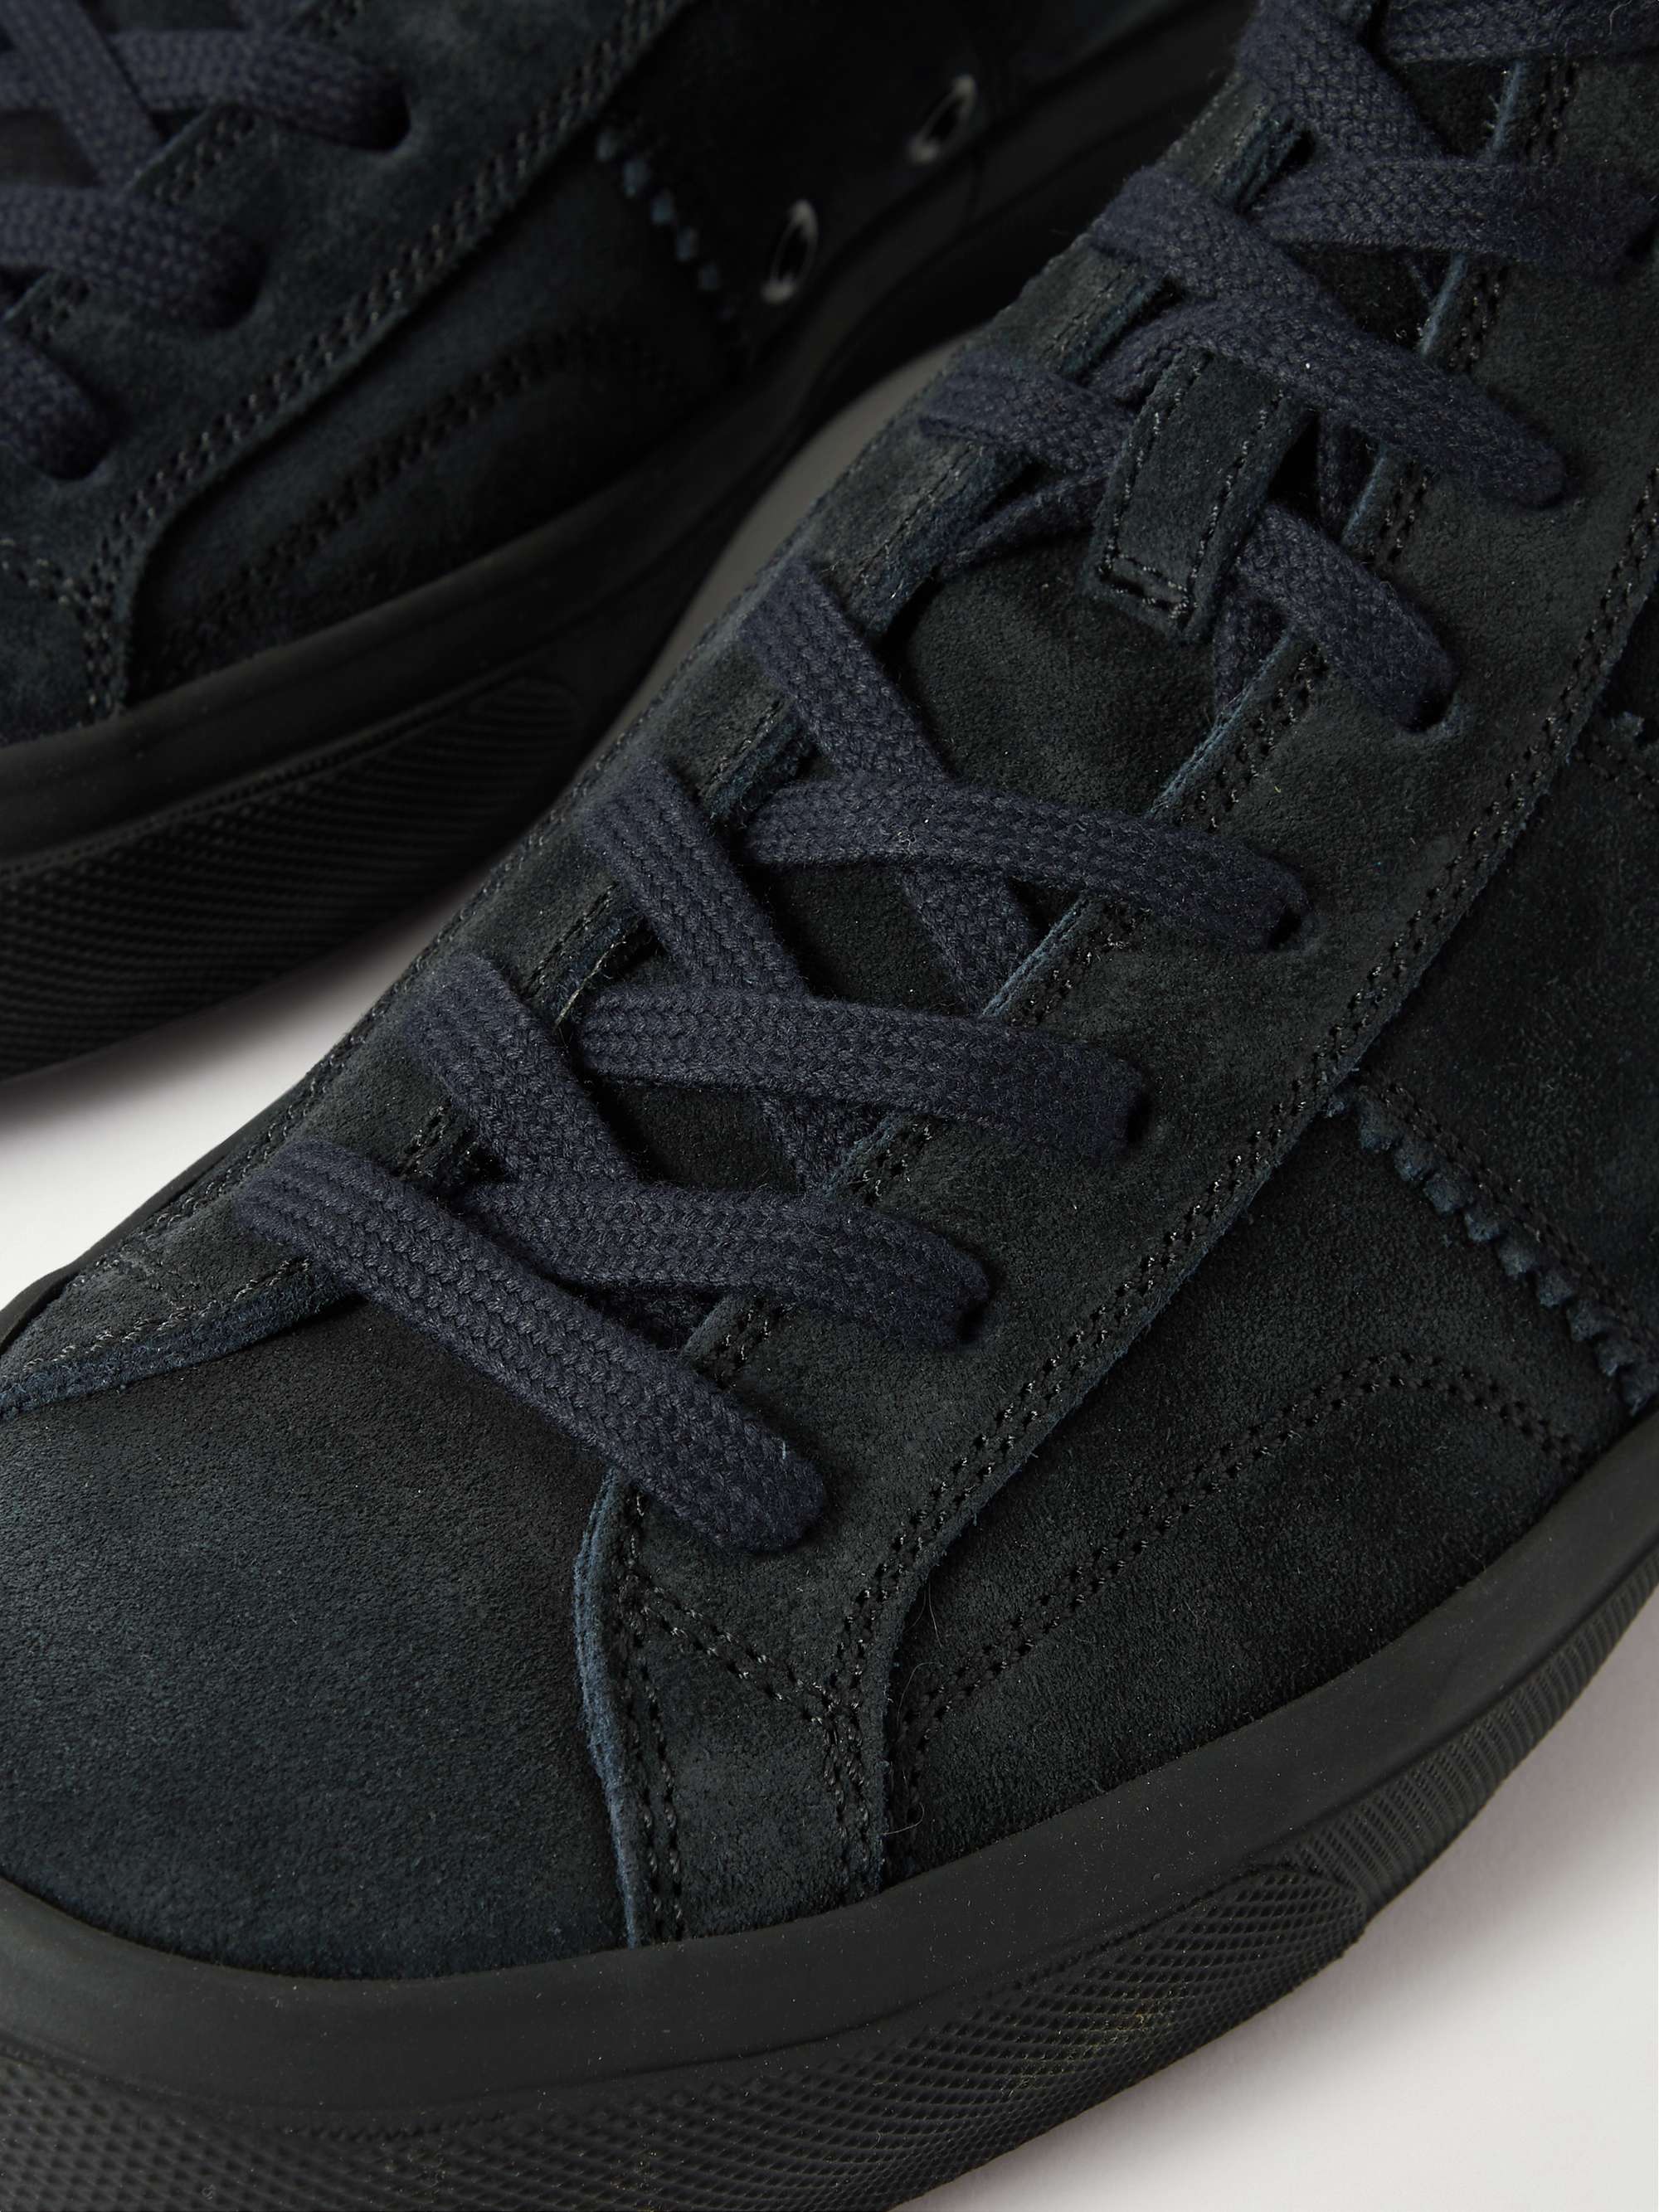 TOM FORD Cambridge Suede High-Top Sneakers